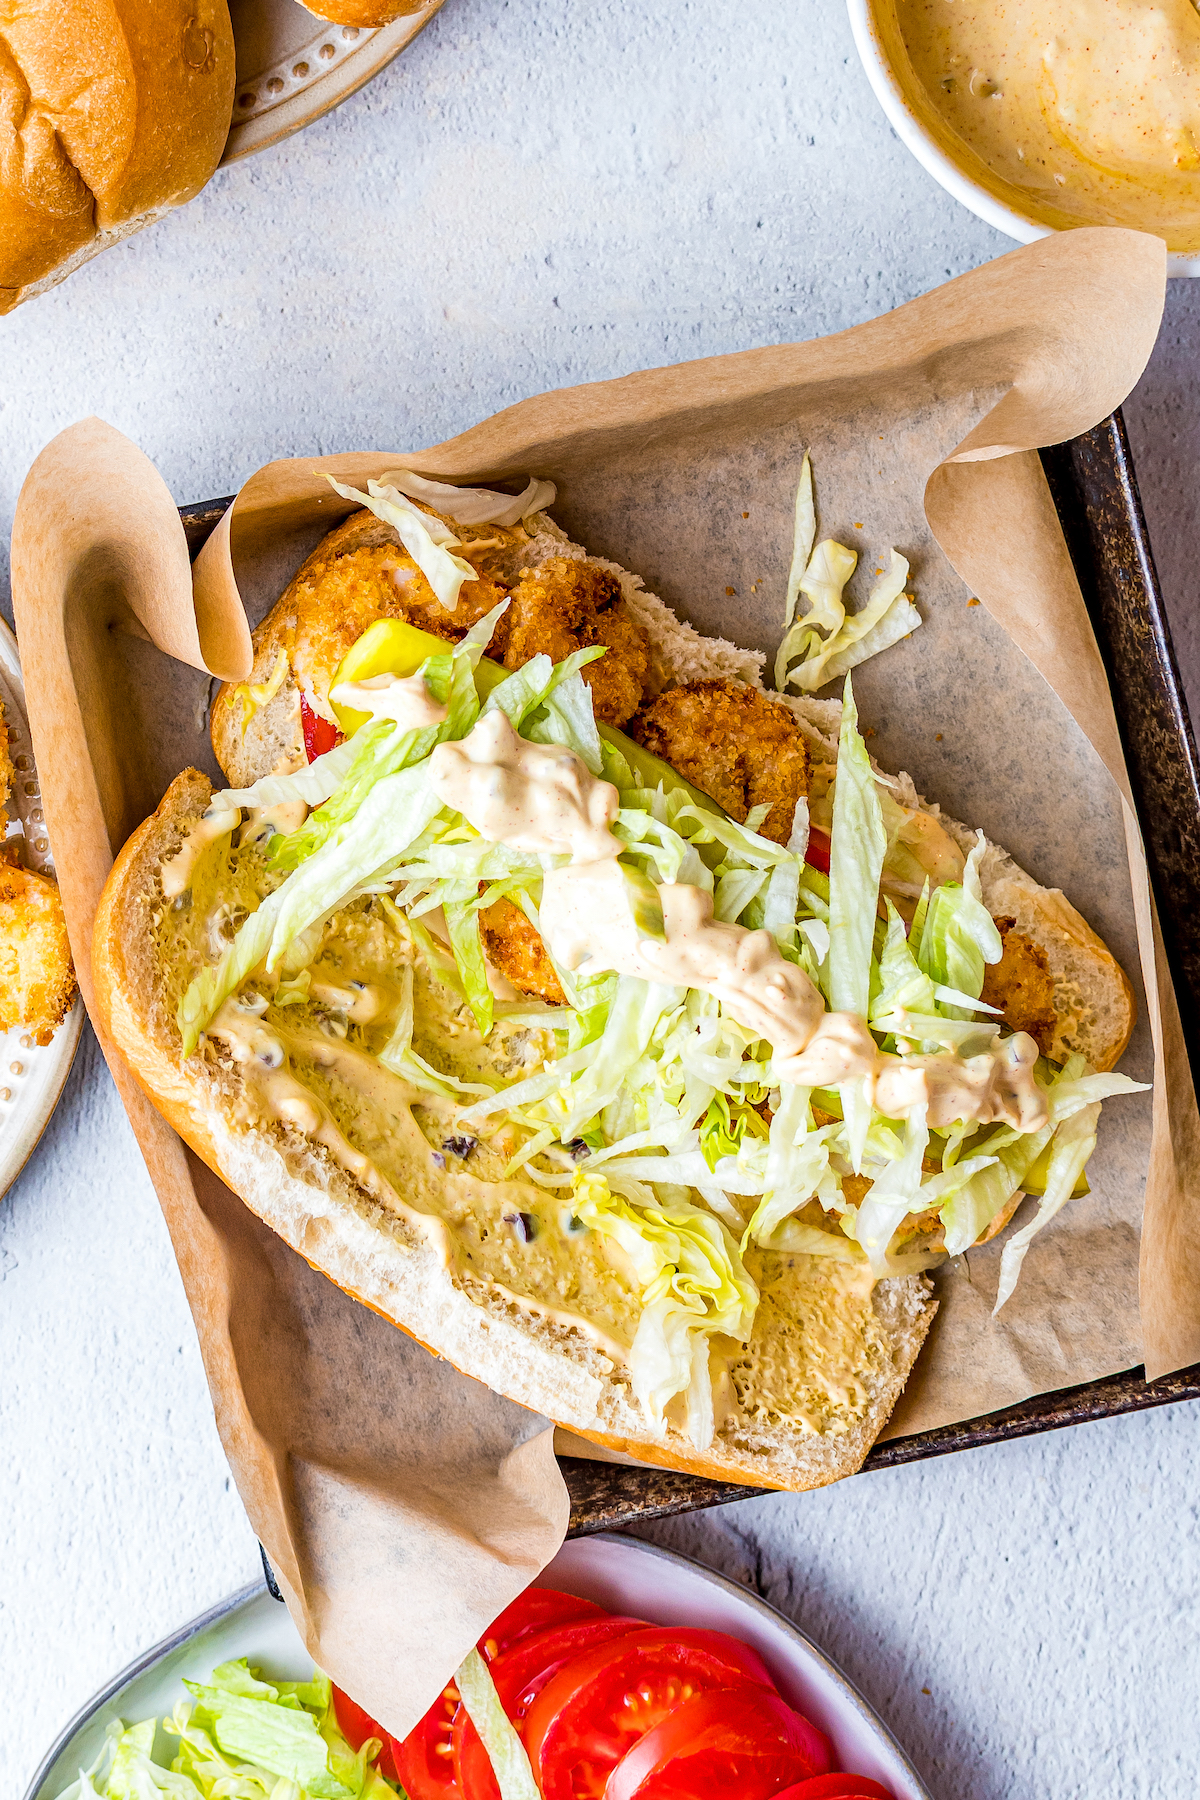 A sandwich bun sliced open and topped with sandwich spread, fried shrimp, shredded lettuce, and tomato.